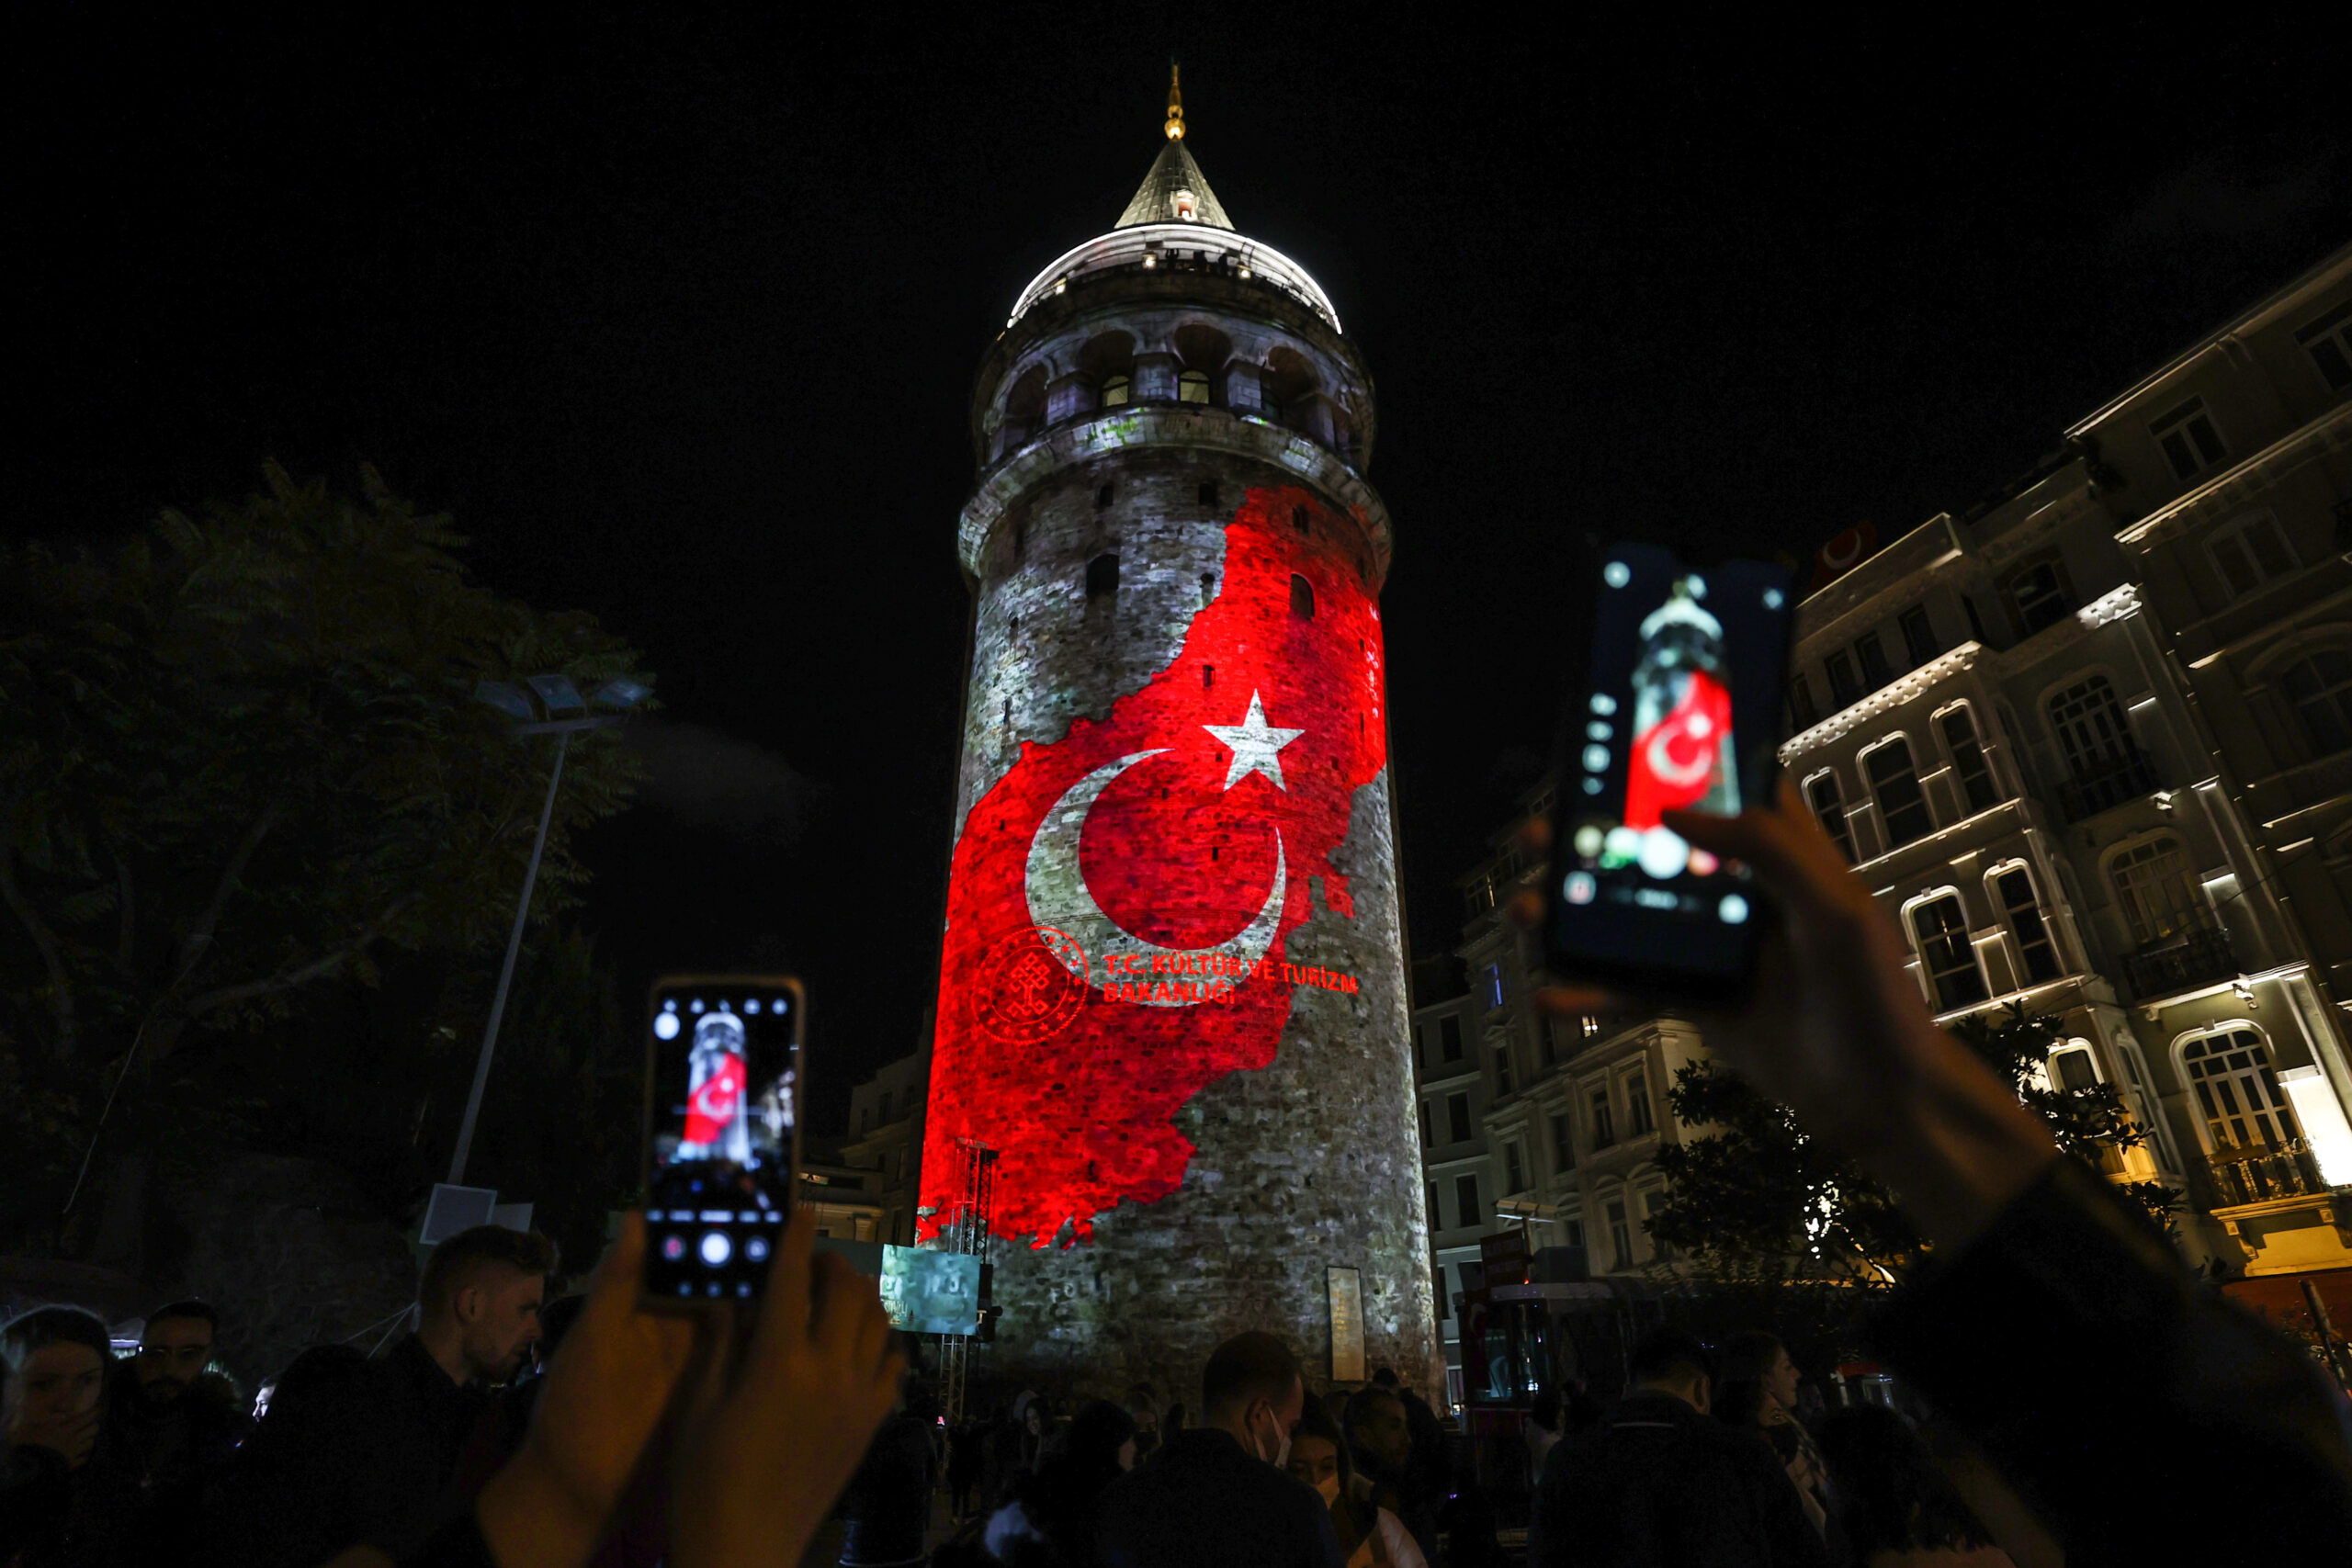 The Galata Tower is illuminated during the 98th anniversary of the Republic Day of Turkey in Istanbul, Turkey on October 29, 2021 [Mehmet Murat Önel/Anadolu Agency]